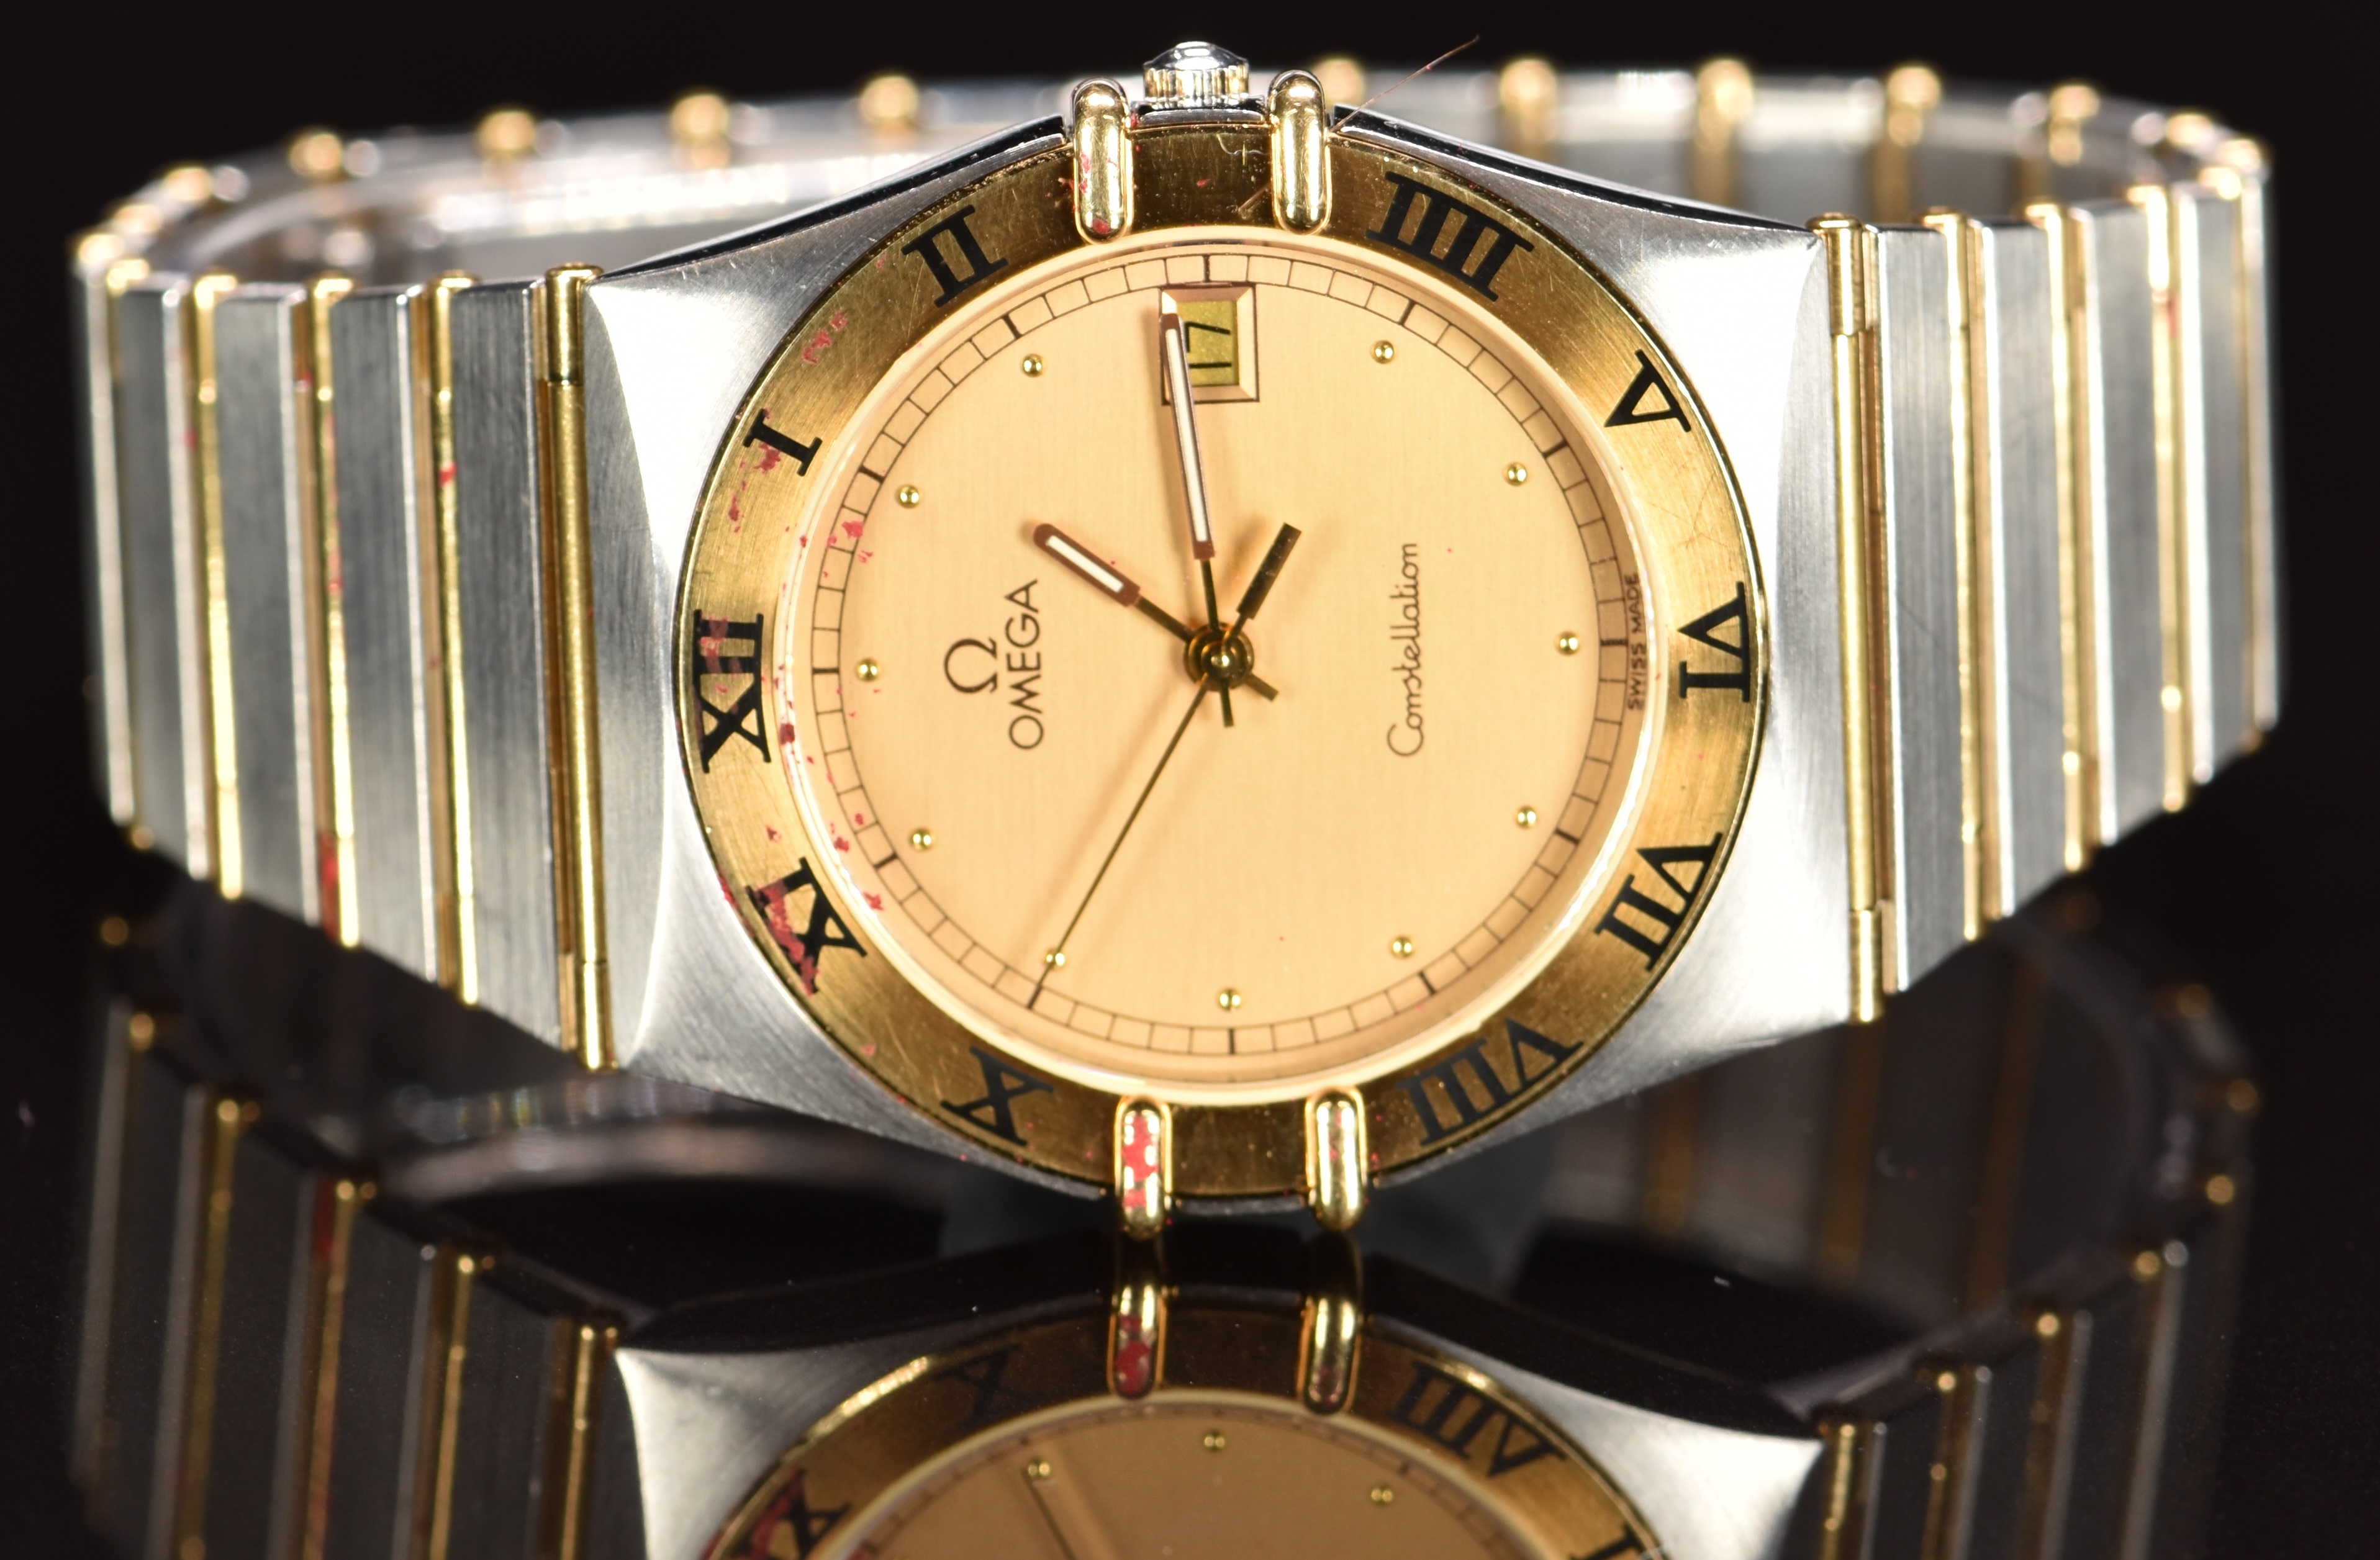 Omega Constellation gentleman's wristwatch with date aperture, luminous hands, gold dial, back Roman - Image 4 of 7